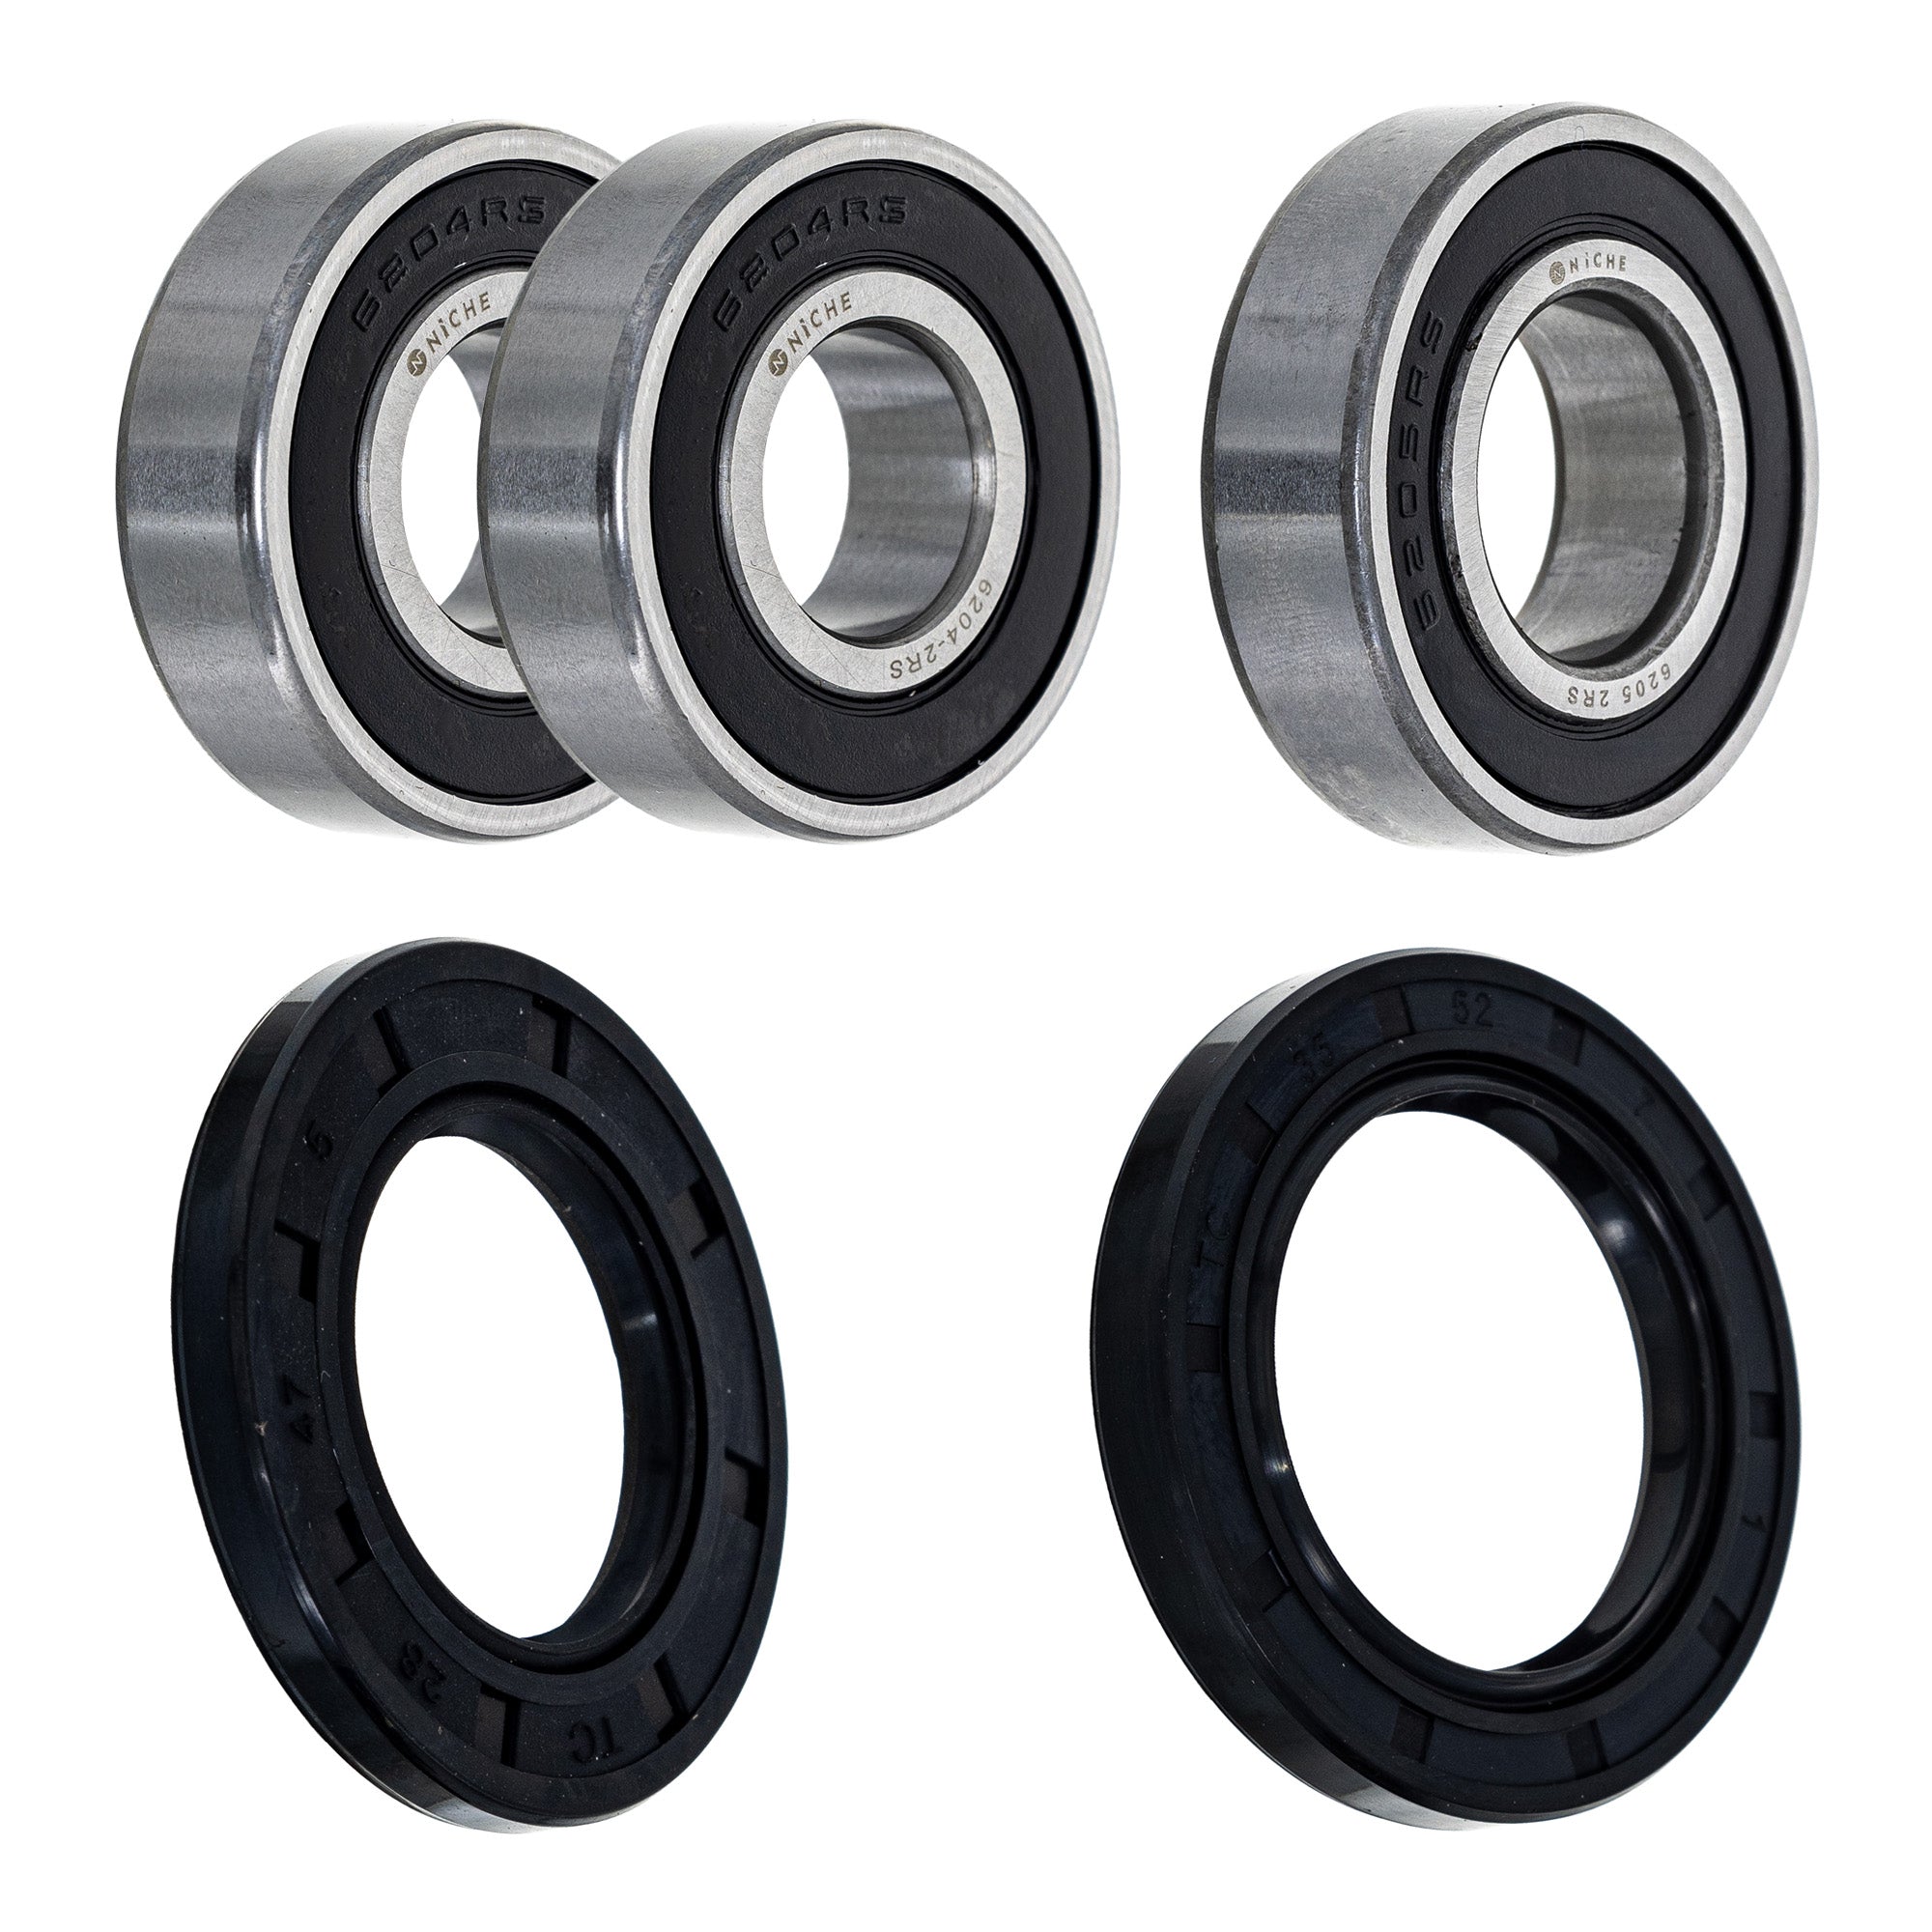 Wheel Bearing Seal Kit for zOTHER Ref No Z900RS ER-6N NICHE MK1008877